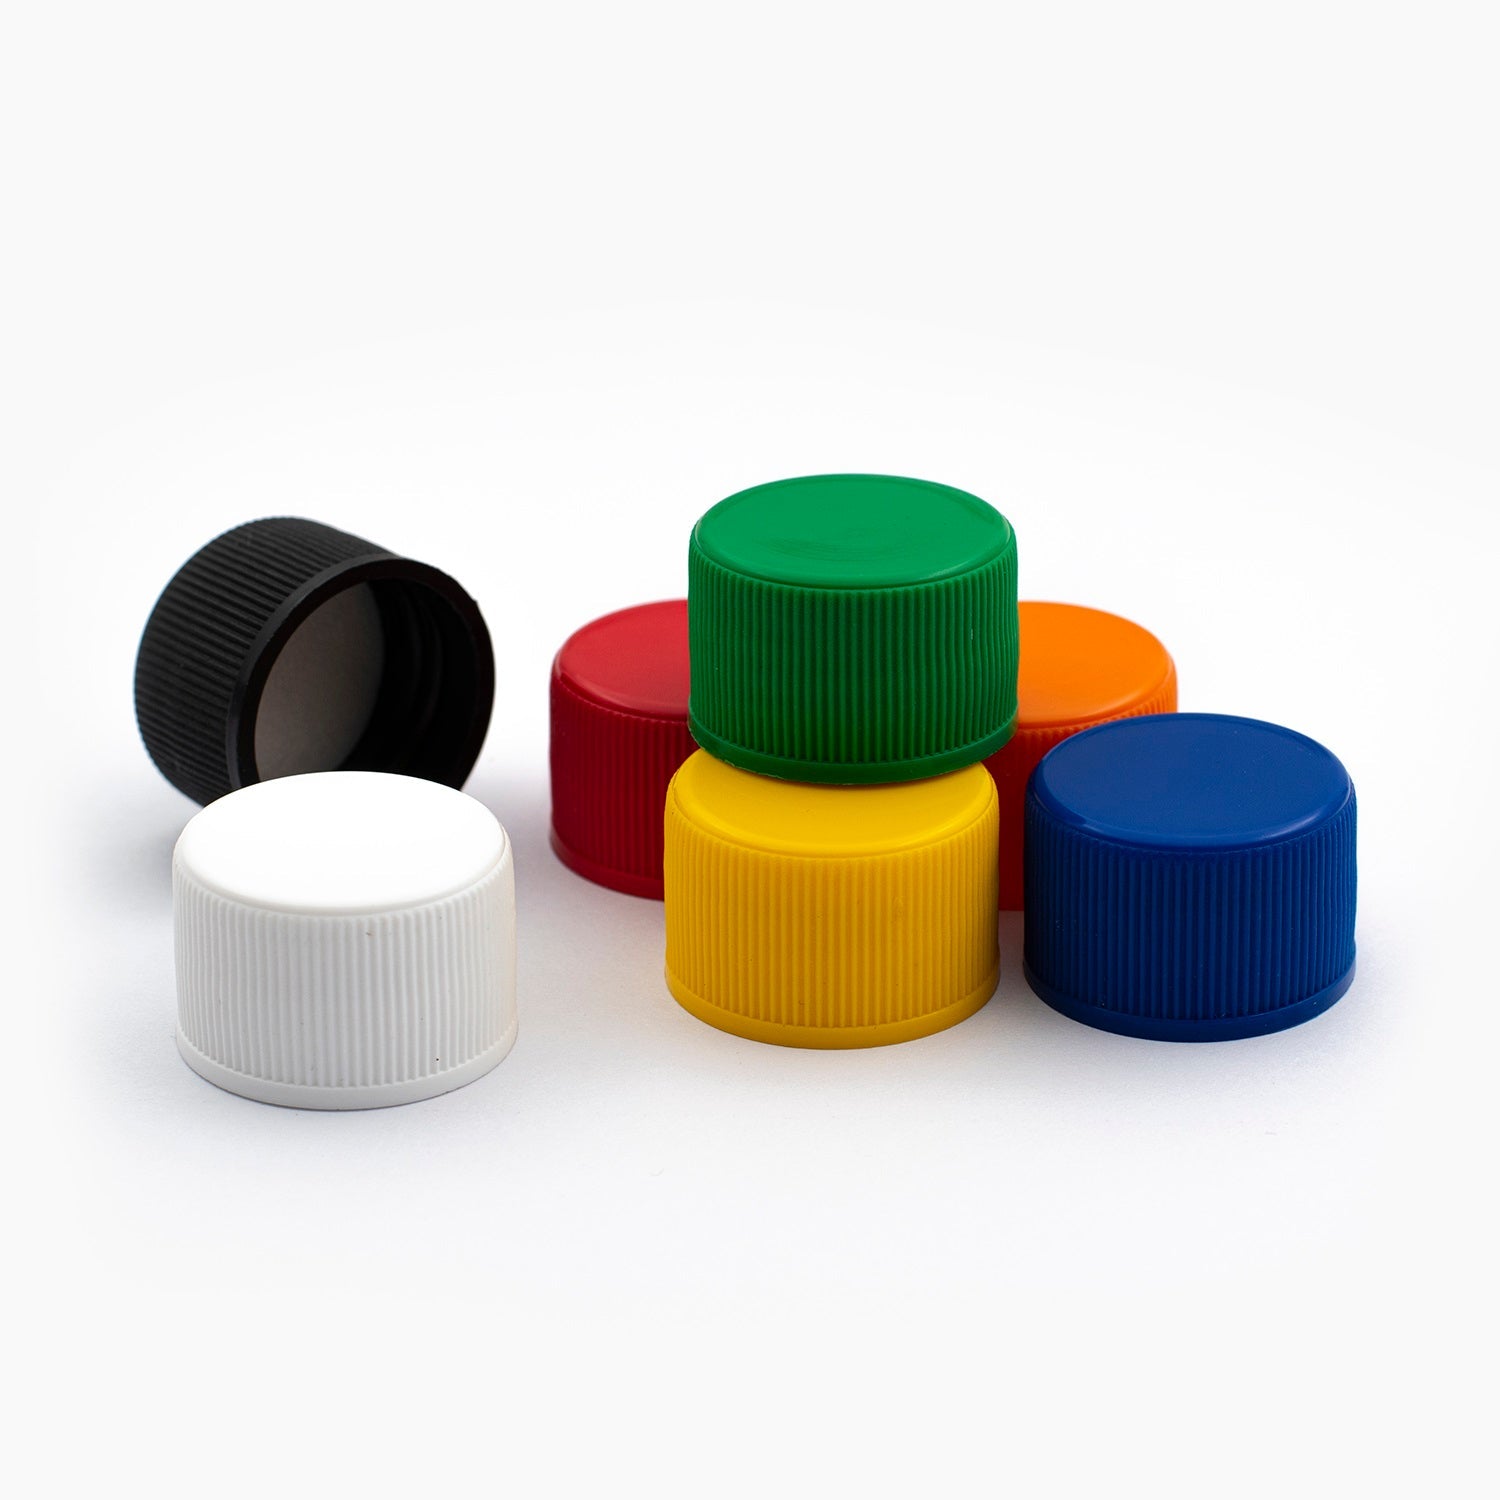 Seven 24mm Plastic Standard EPE Liner Bottle Caps Of Varying Colour On White Background | Brightpack Closures And Accessories